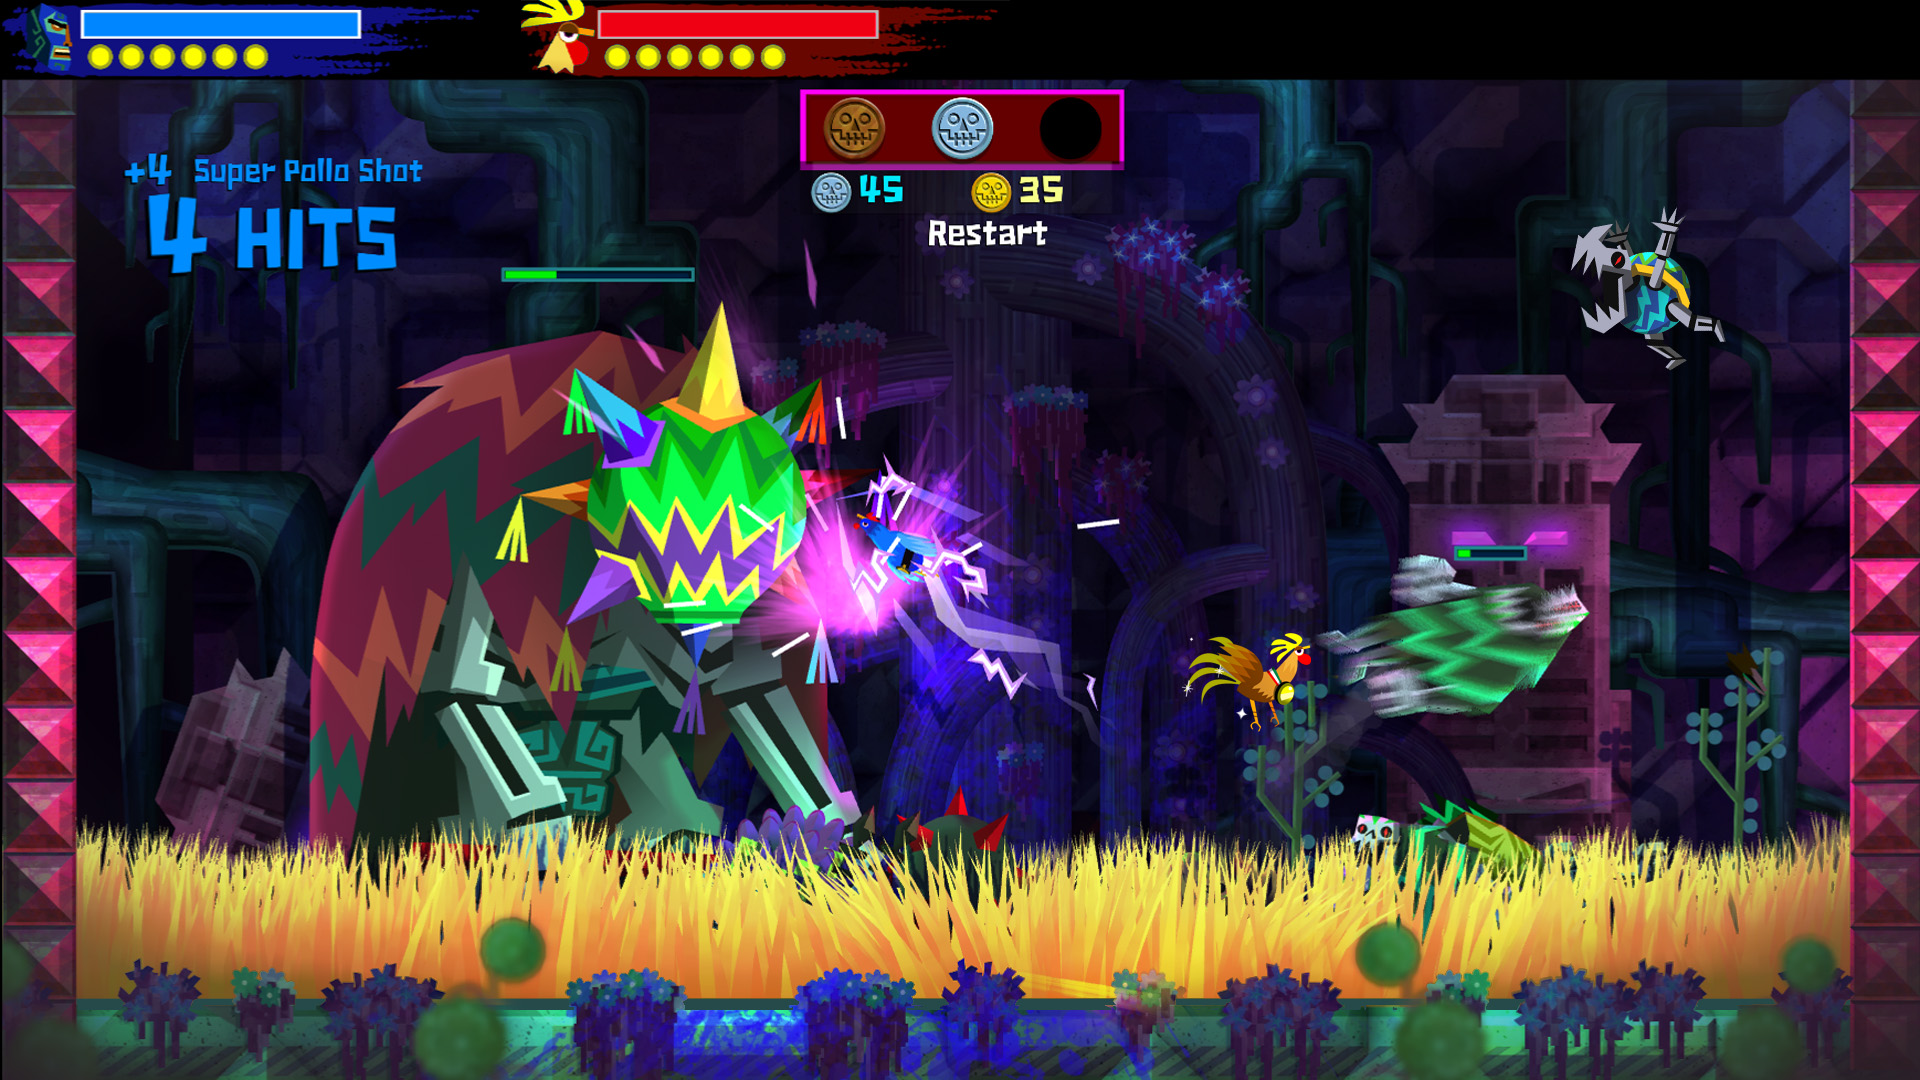 Guacamelee! 2 - The Proving Grounds (Challenge Level) screenshot